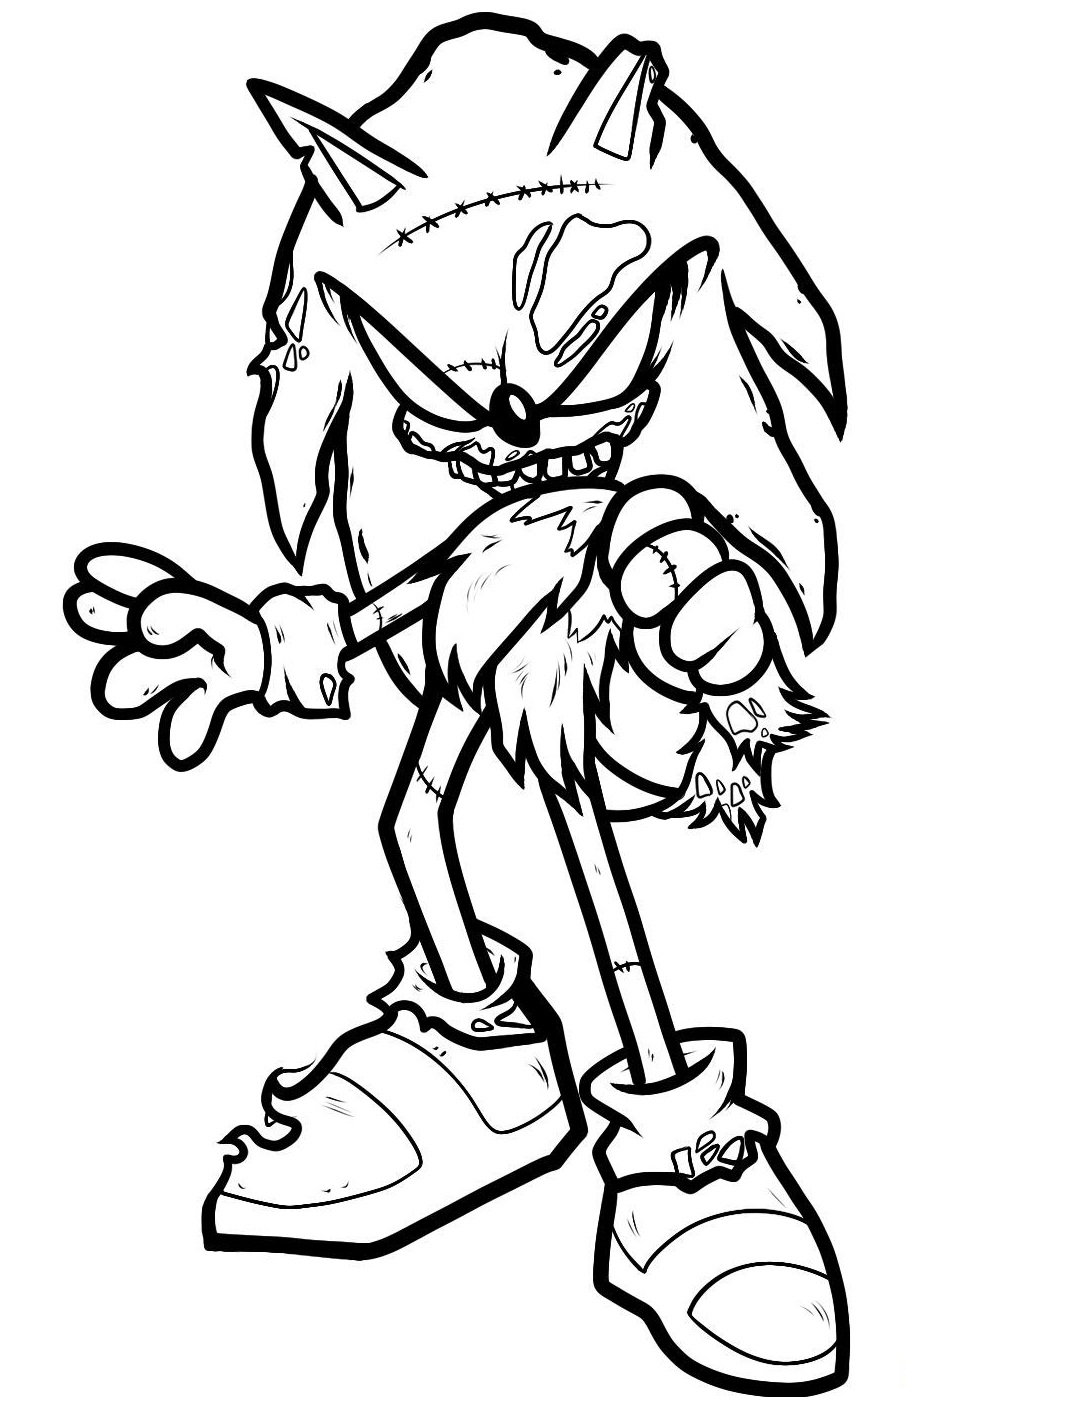 Download Sonic The Undead Coloring Page - Free Printable Coloring Pages for Kids